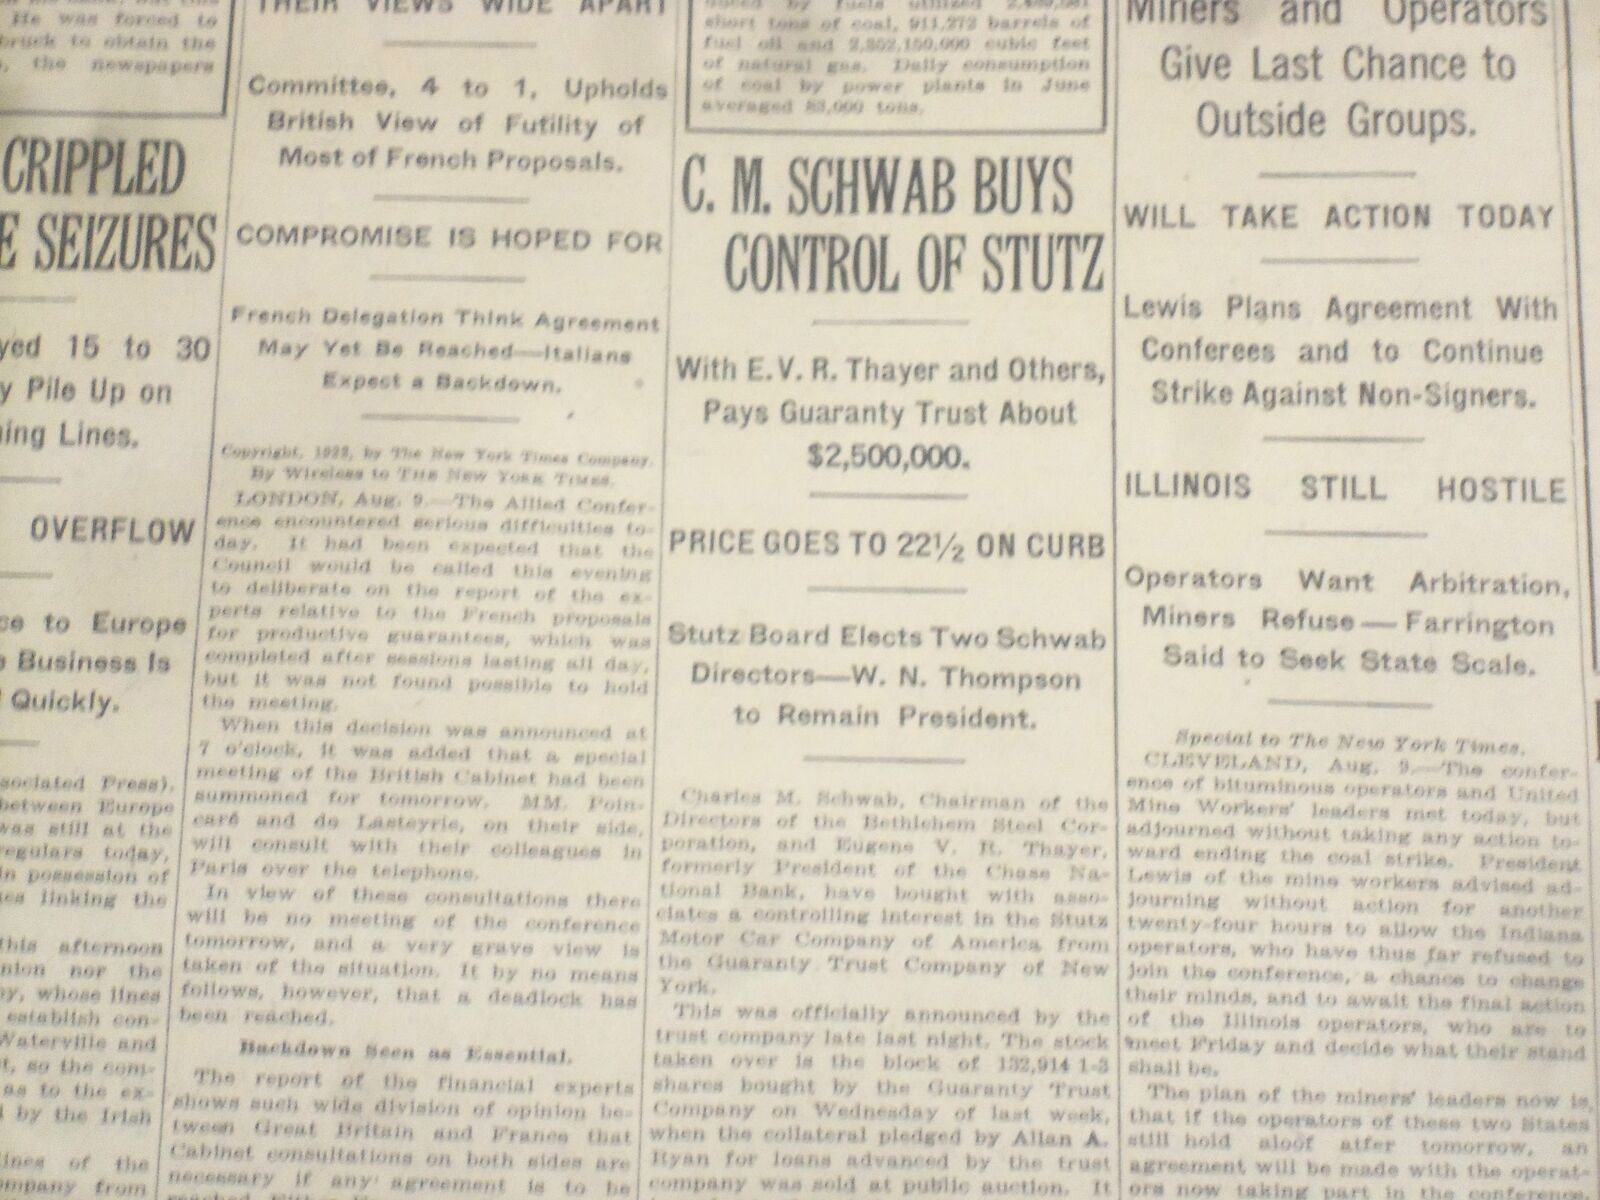 1922 AUGUST 10 NEW YORK TIMES - C. M. SCHWAB BUYS CONTROL OF STUTZ - NT 8368